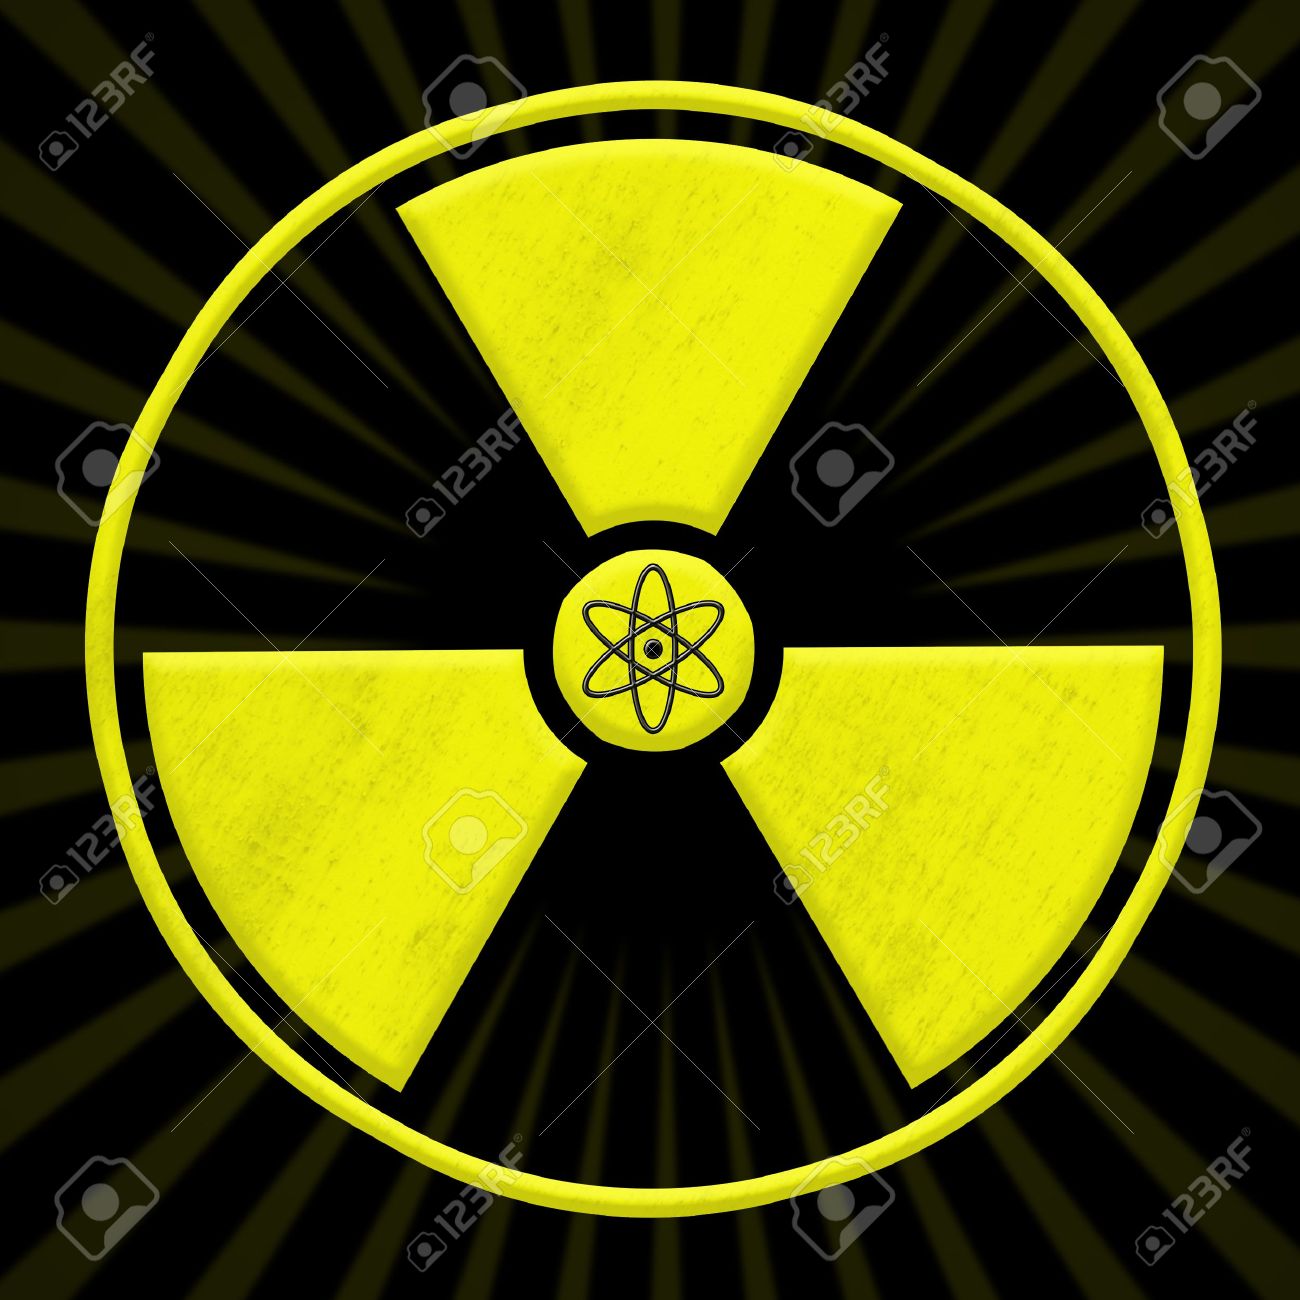 4151274-radioactive-symbol-with-gammar-radiations-and-atomic-nuclear-power-symbol.jpg